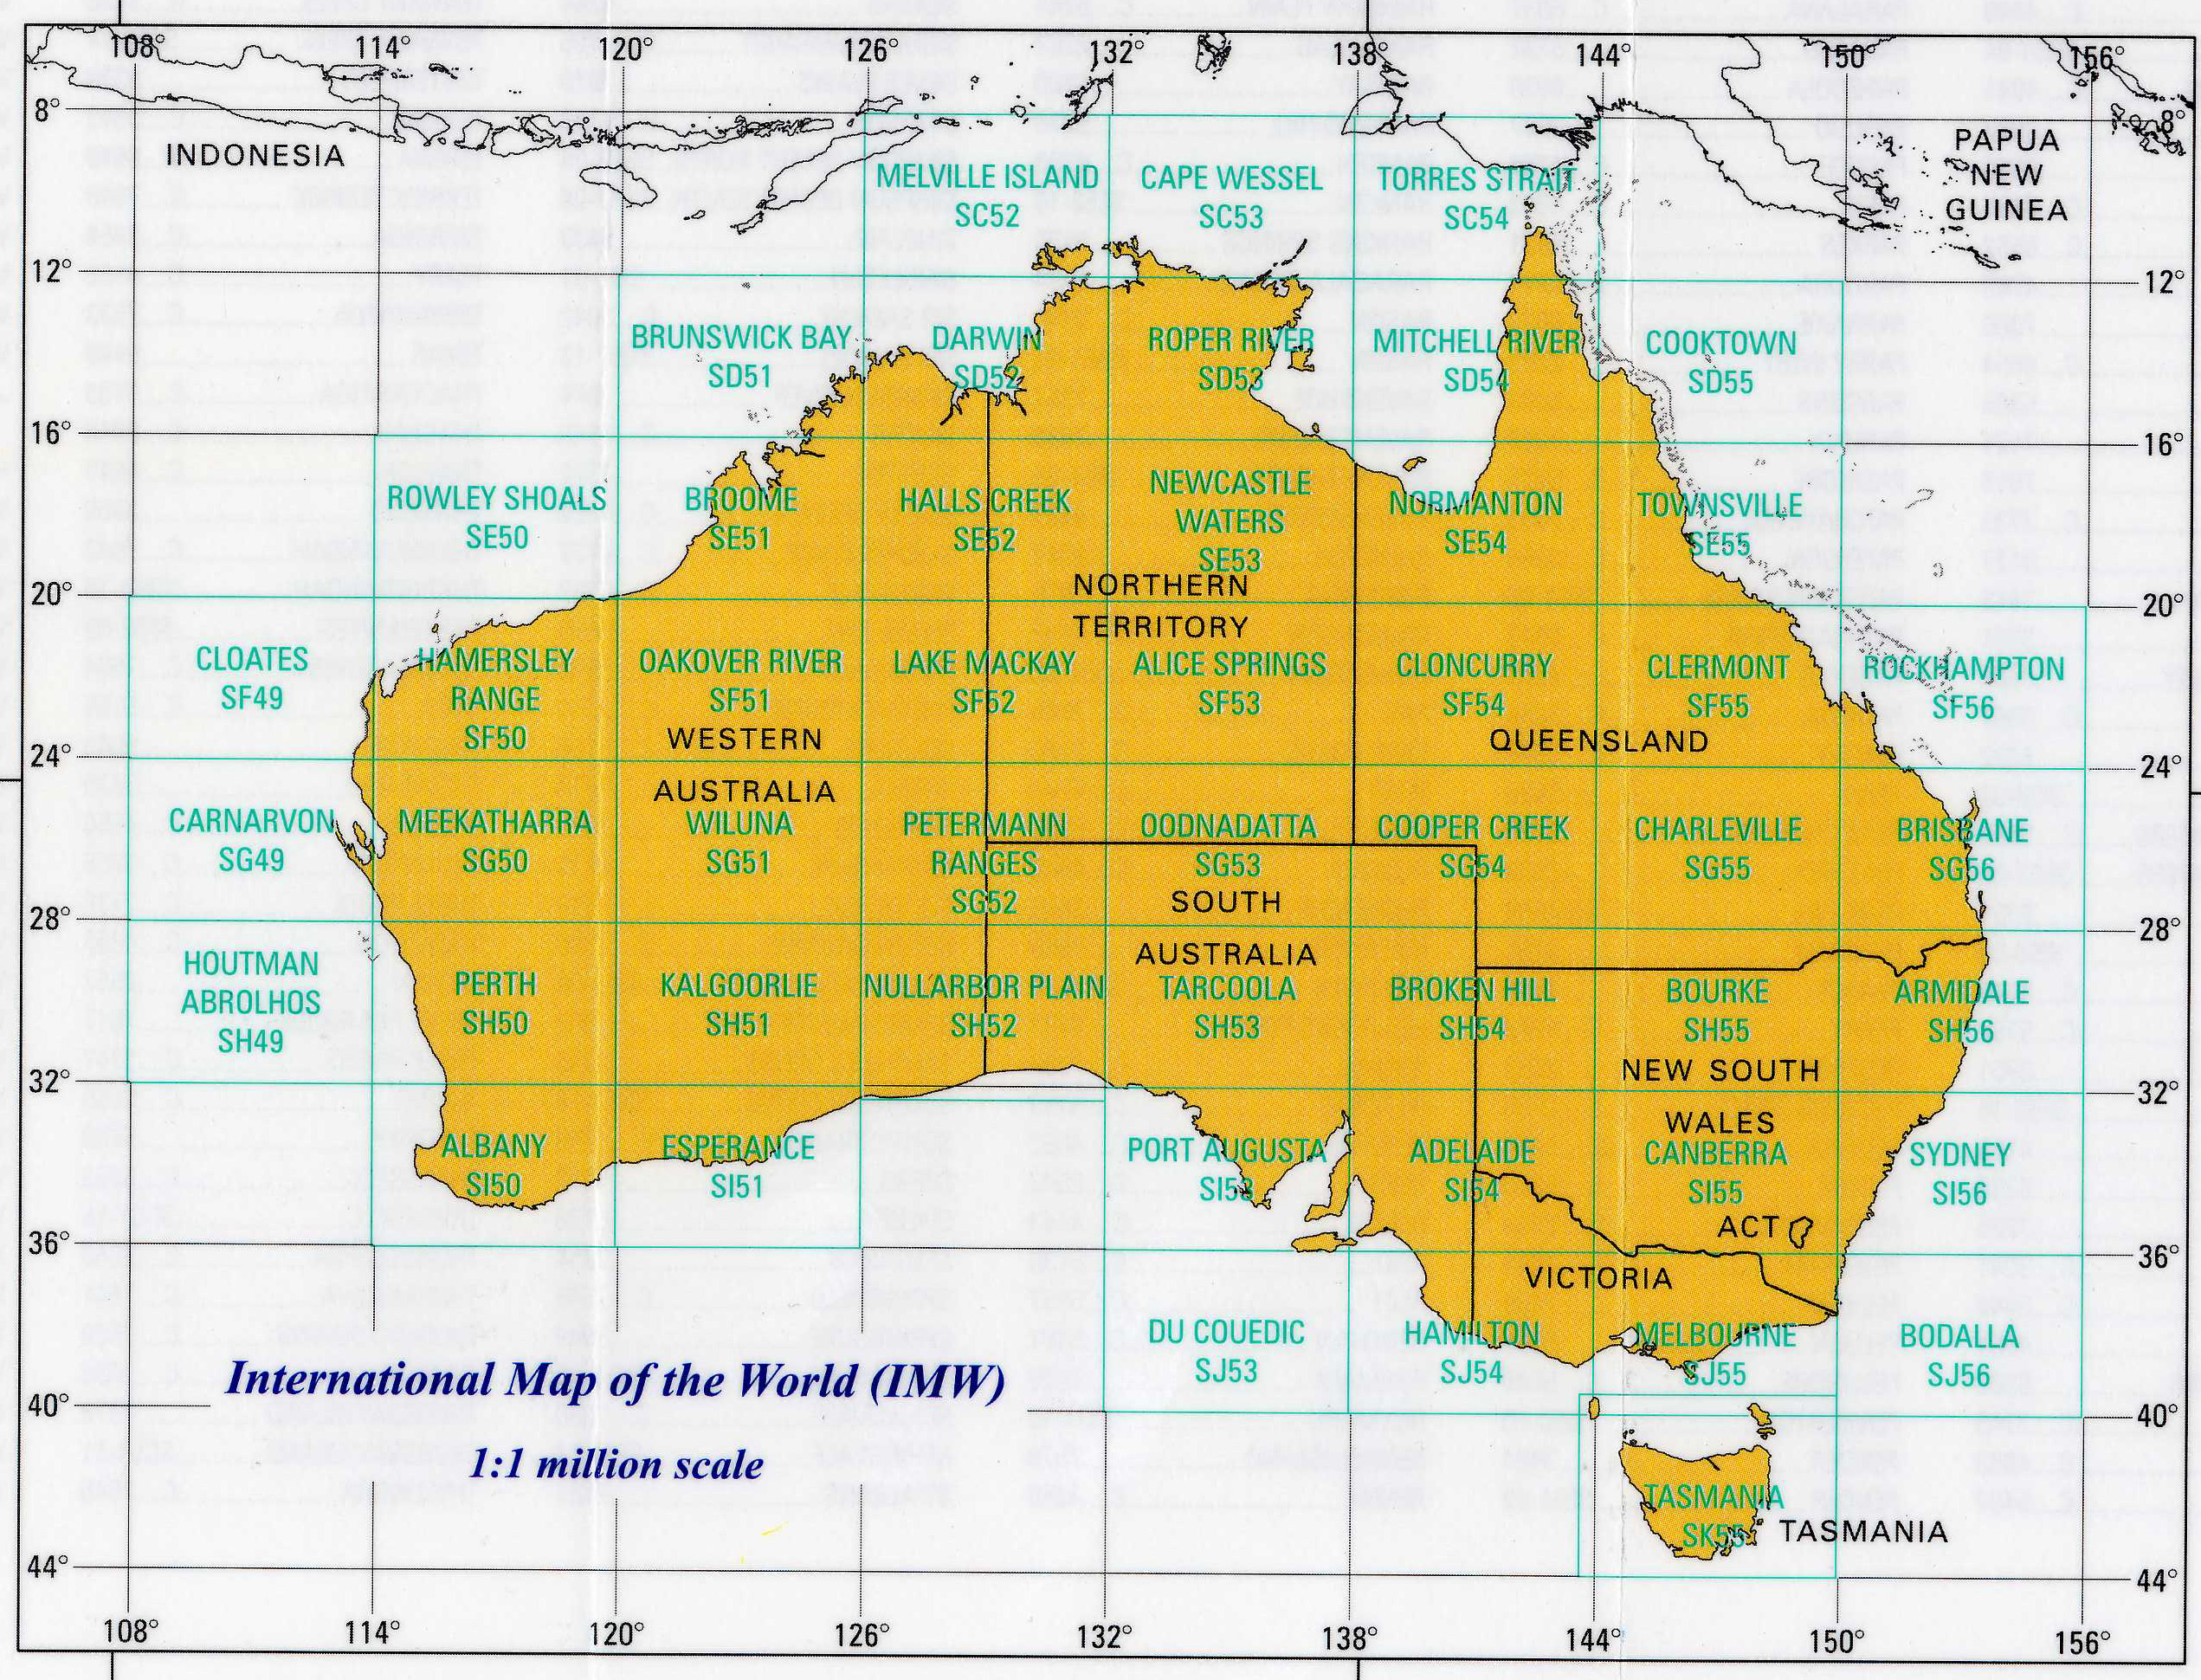 Index for the IMW maps which cover Australia